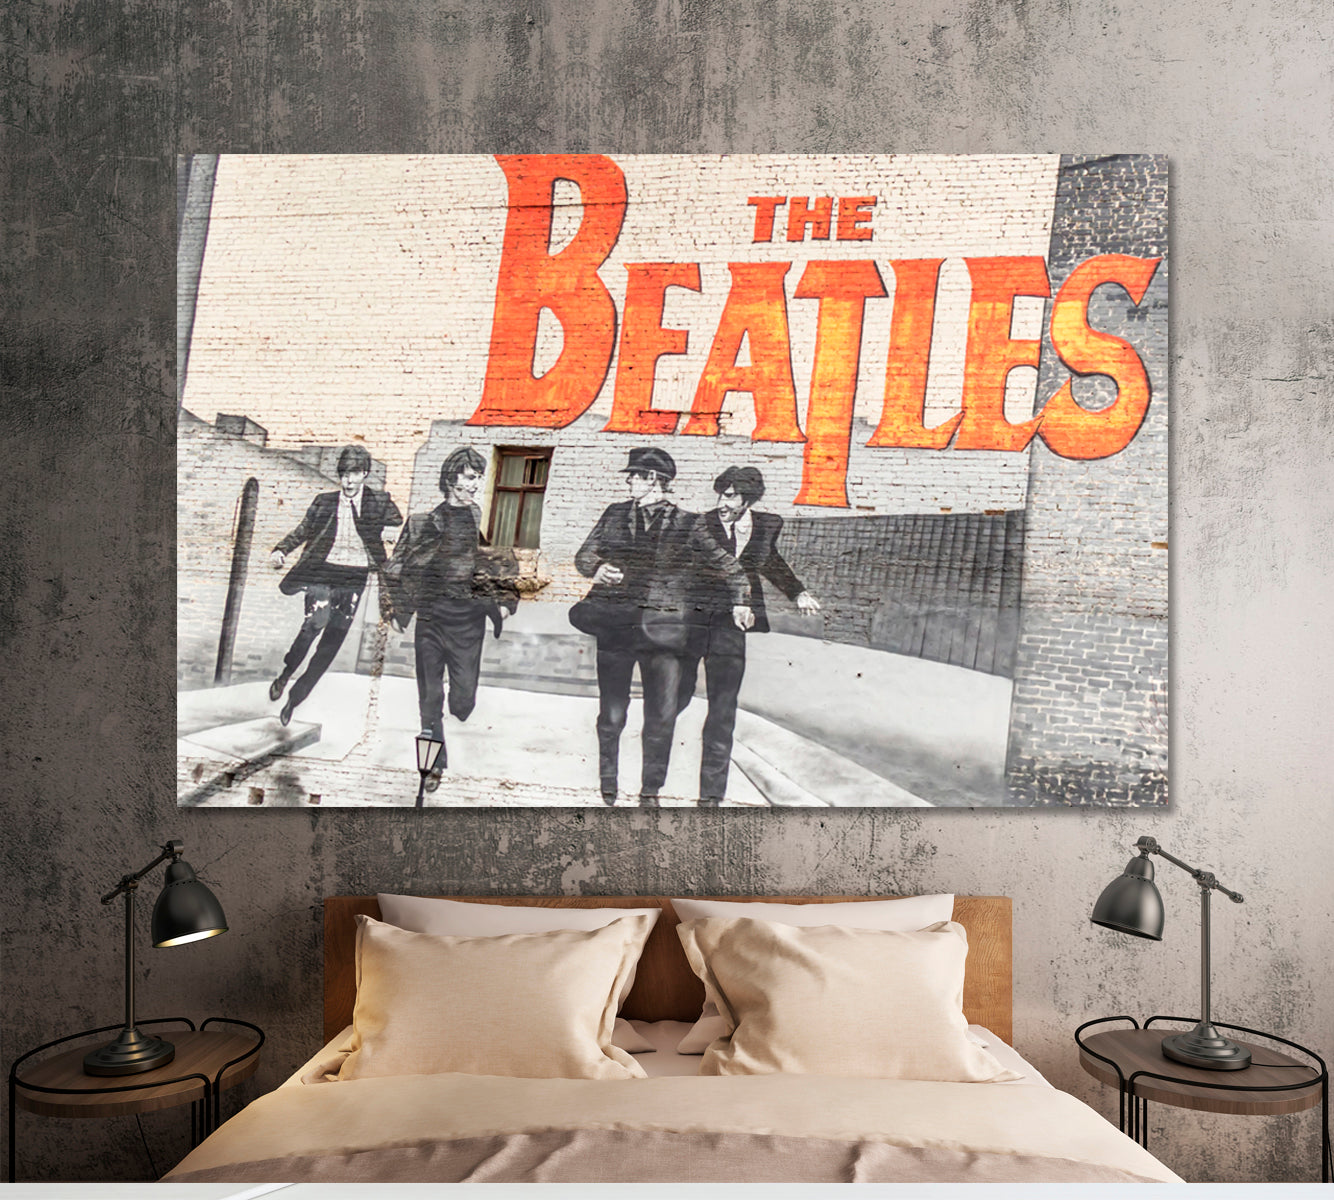 THE BEATLES GREATEST BAND EVER Iconic English Rock Band Inspired Graffiti Celebs Canvas Print Artesty 1 panel 24" x 16" 